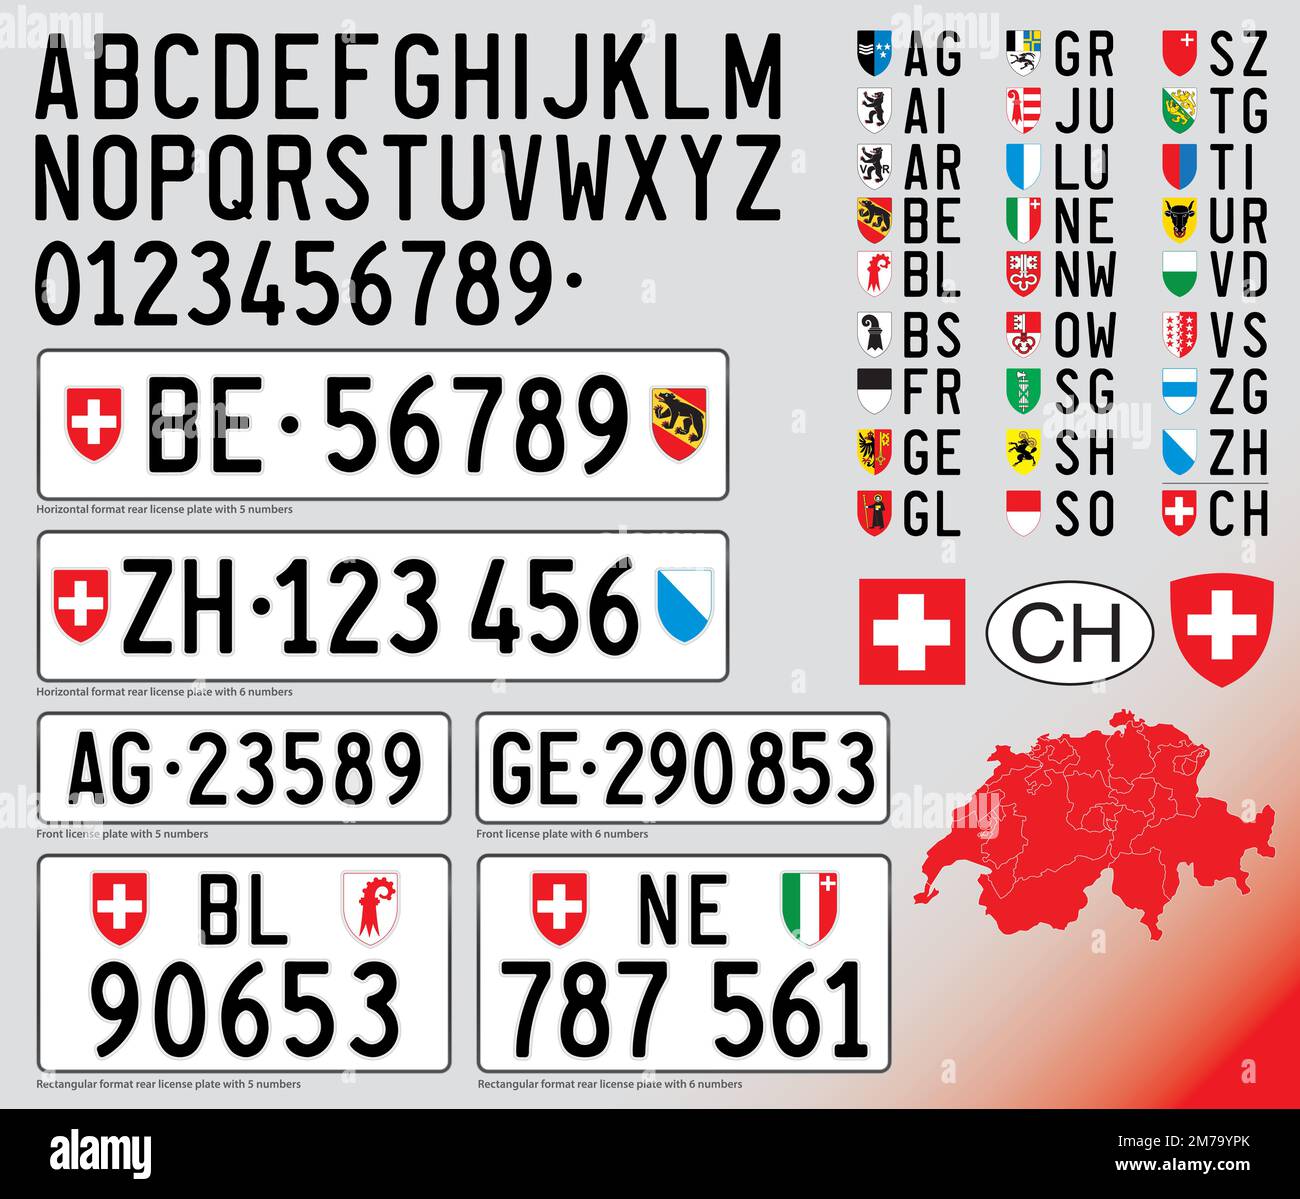 Switzerland car license plate, European country, letters, numbers and symbols, vector illustration Stock Vector